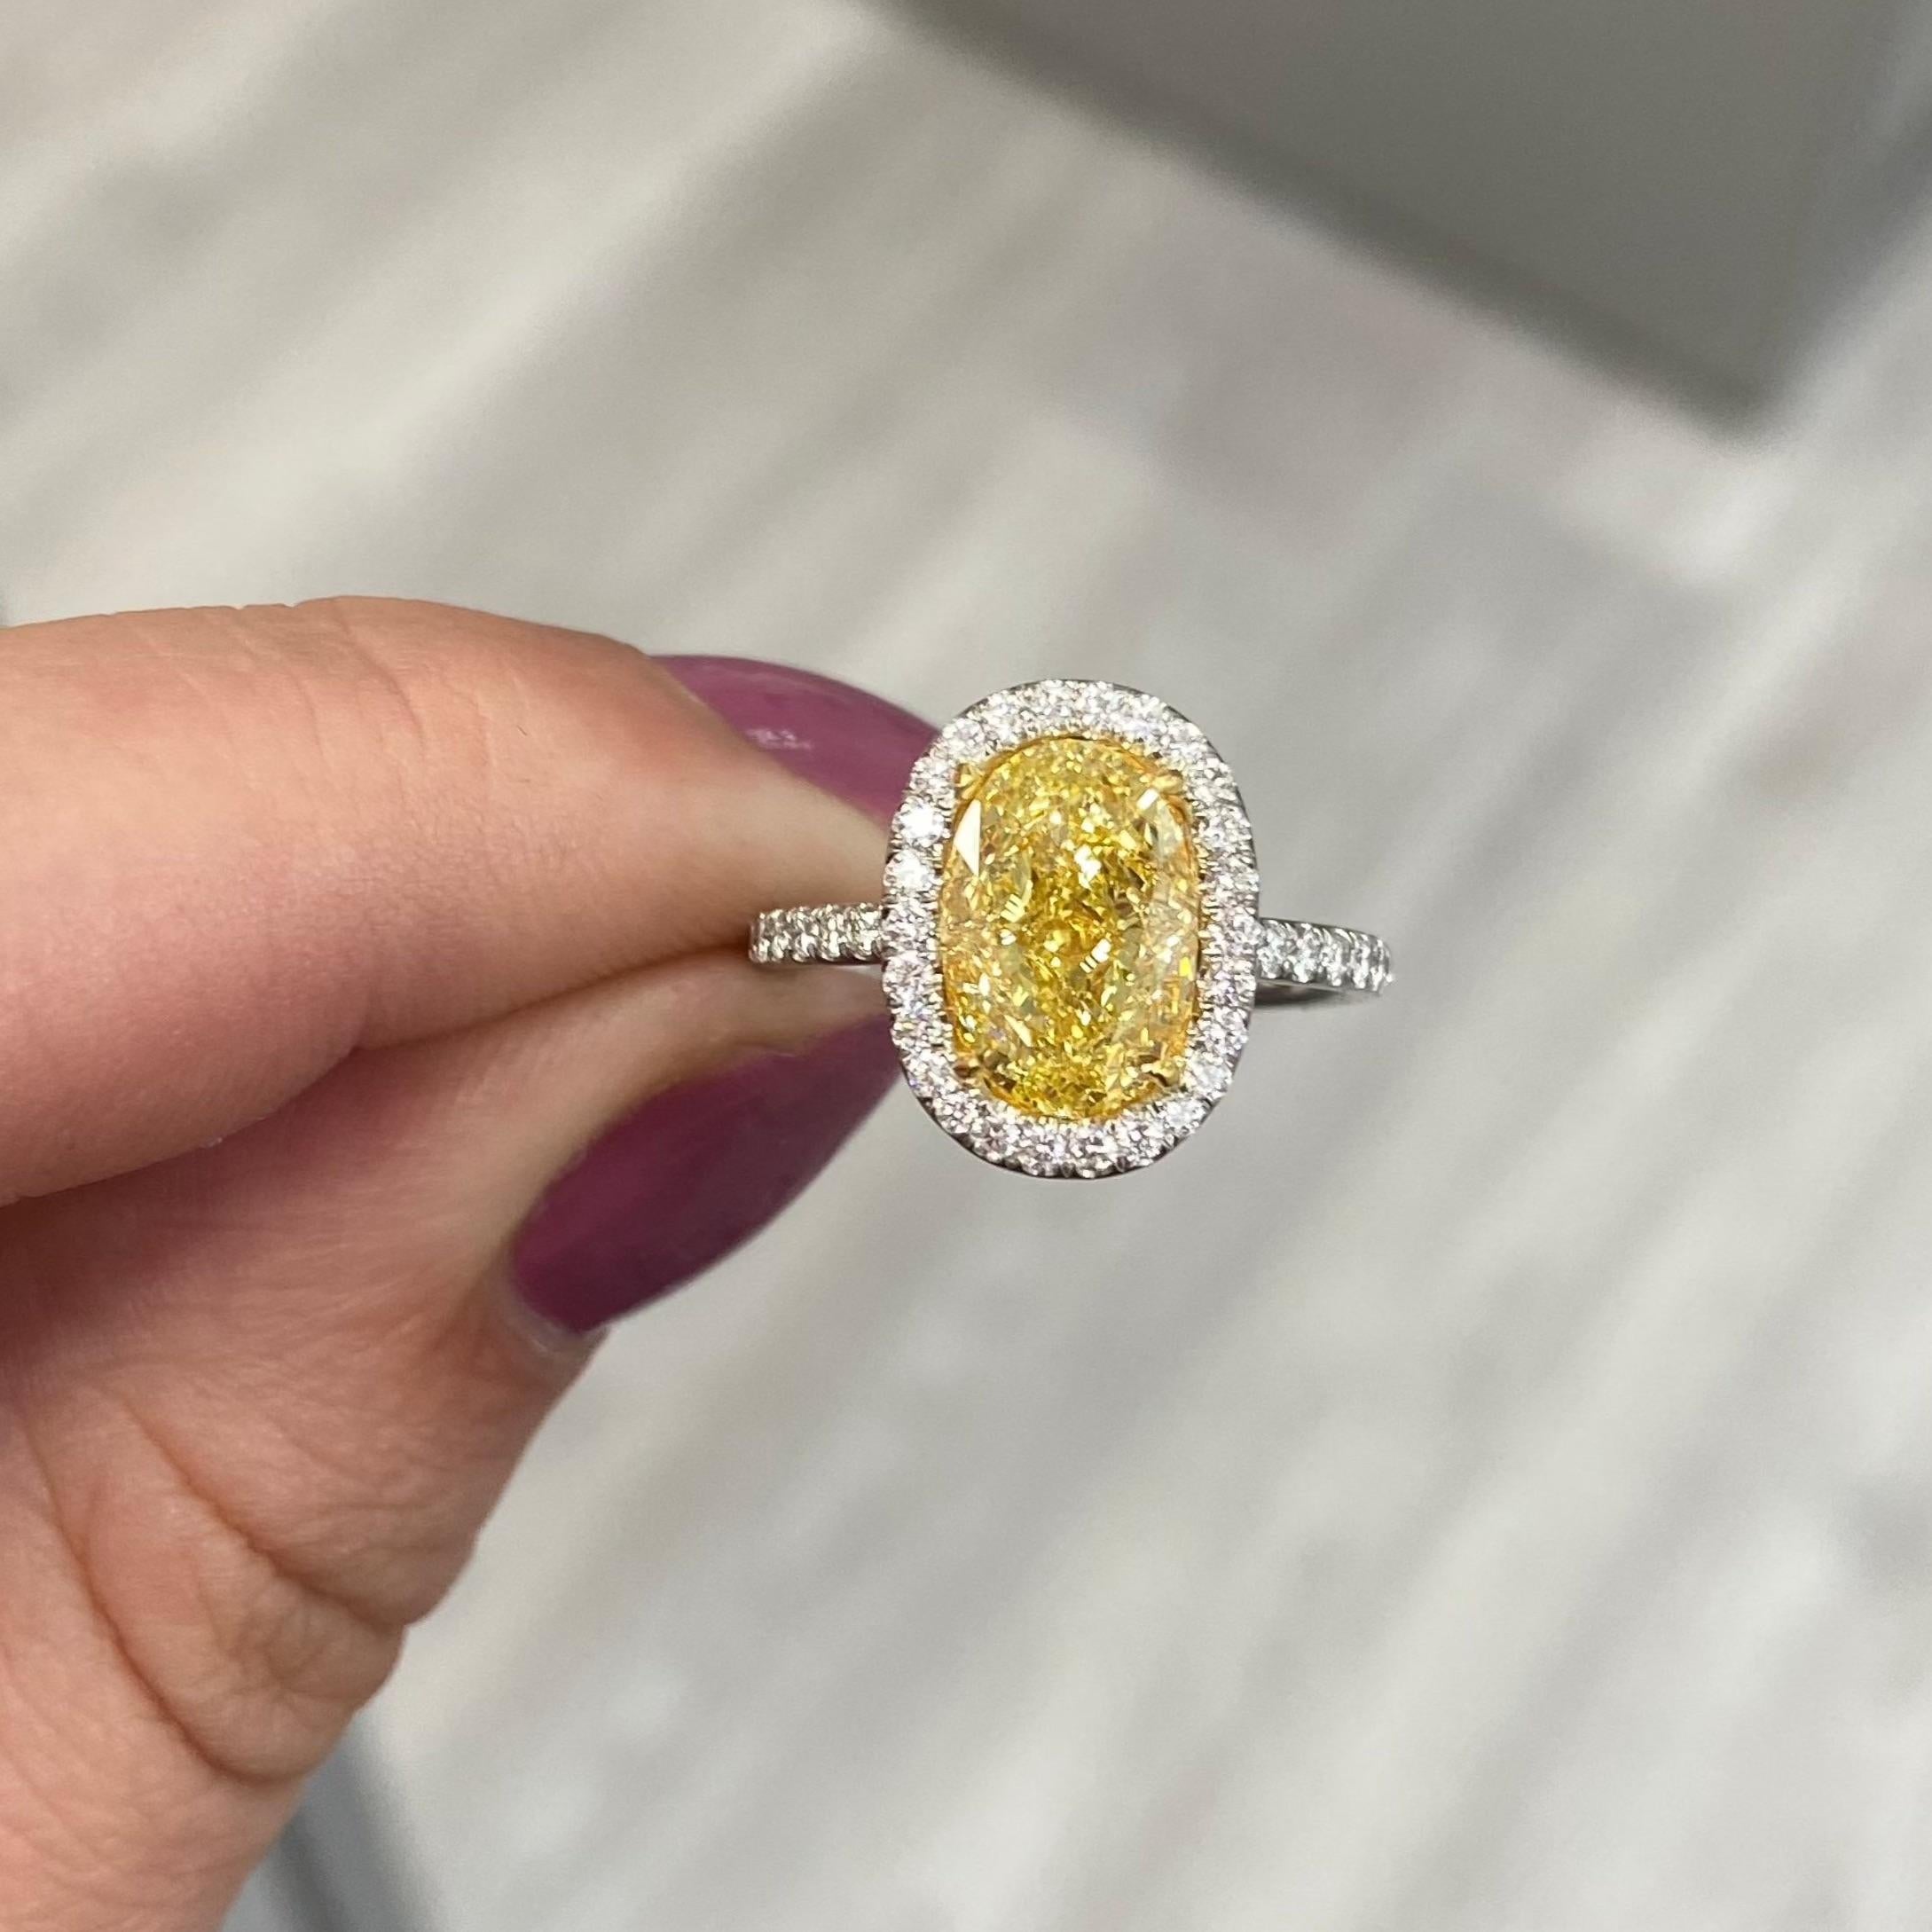 Juicy 3ct Fancy Yellow Oval full of color, no bow tie and amazing shine
Set in a Platinum and 18kt Yellow Gold ring with 0.78ct of white rounds